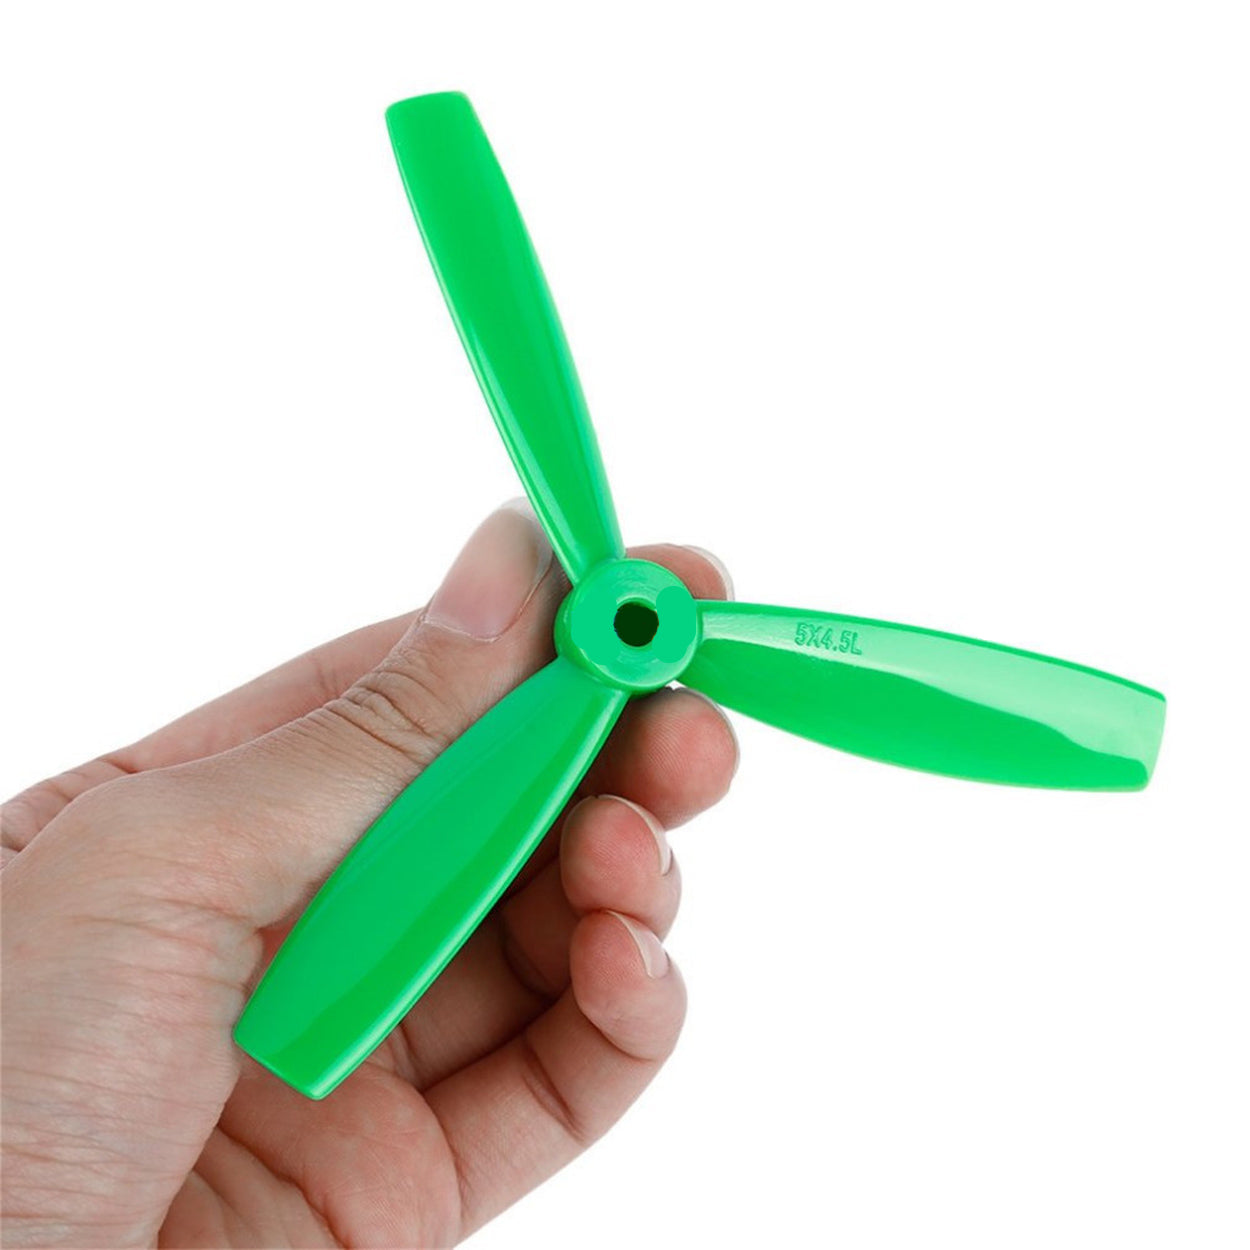 (2 Pairs) 5030 3-Blades CW CCW Propeller (Green+Black) for 250 mini Quadcopter